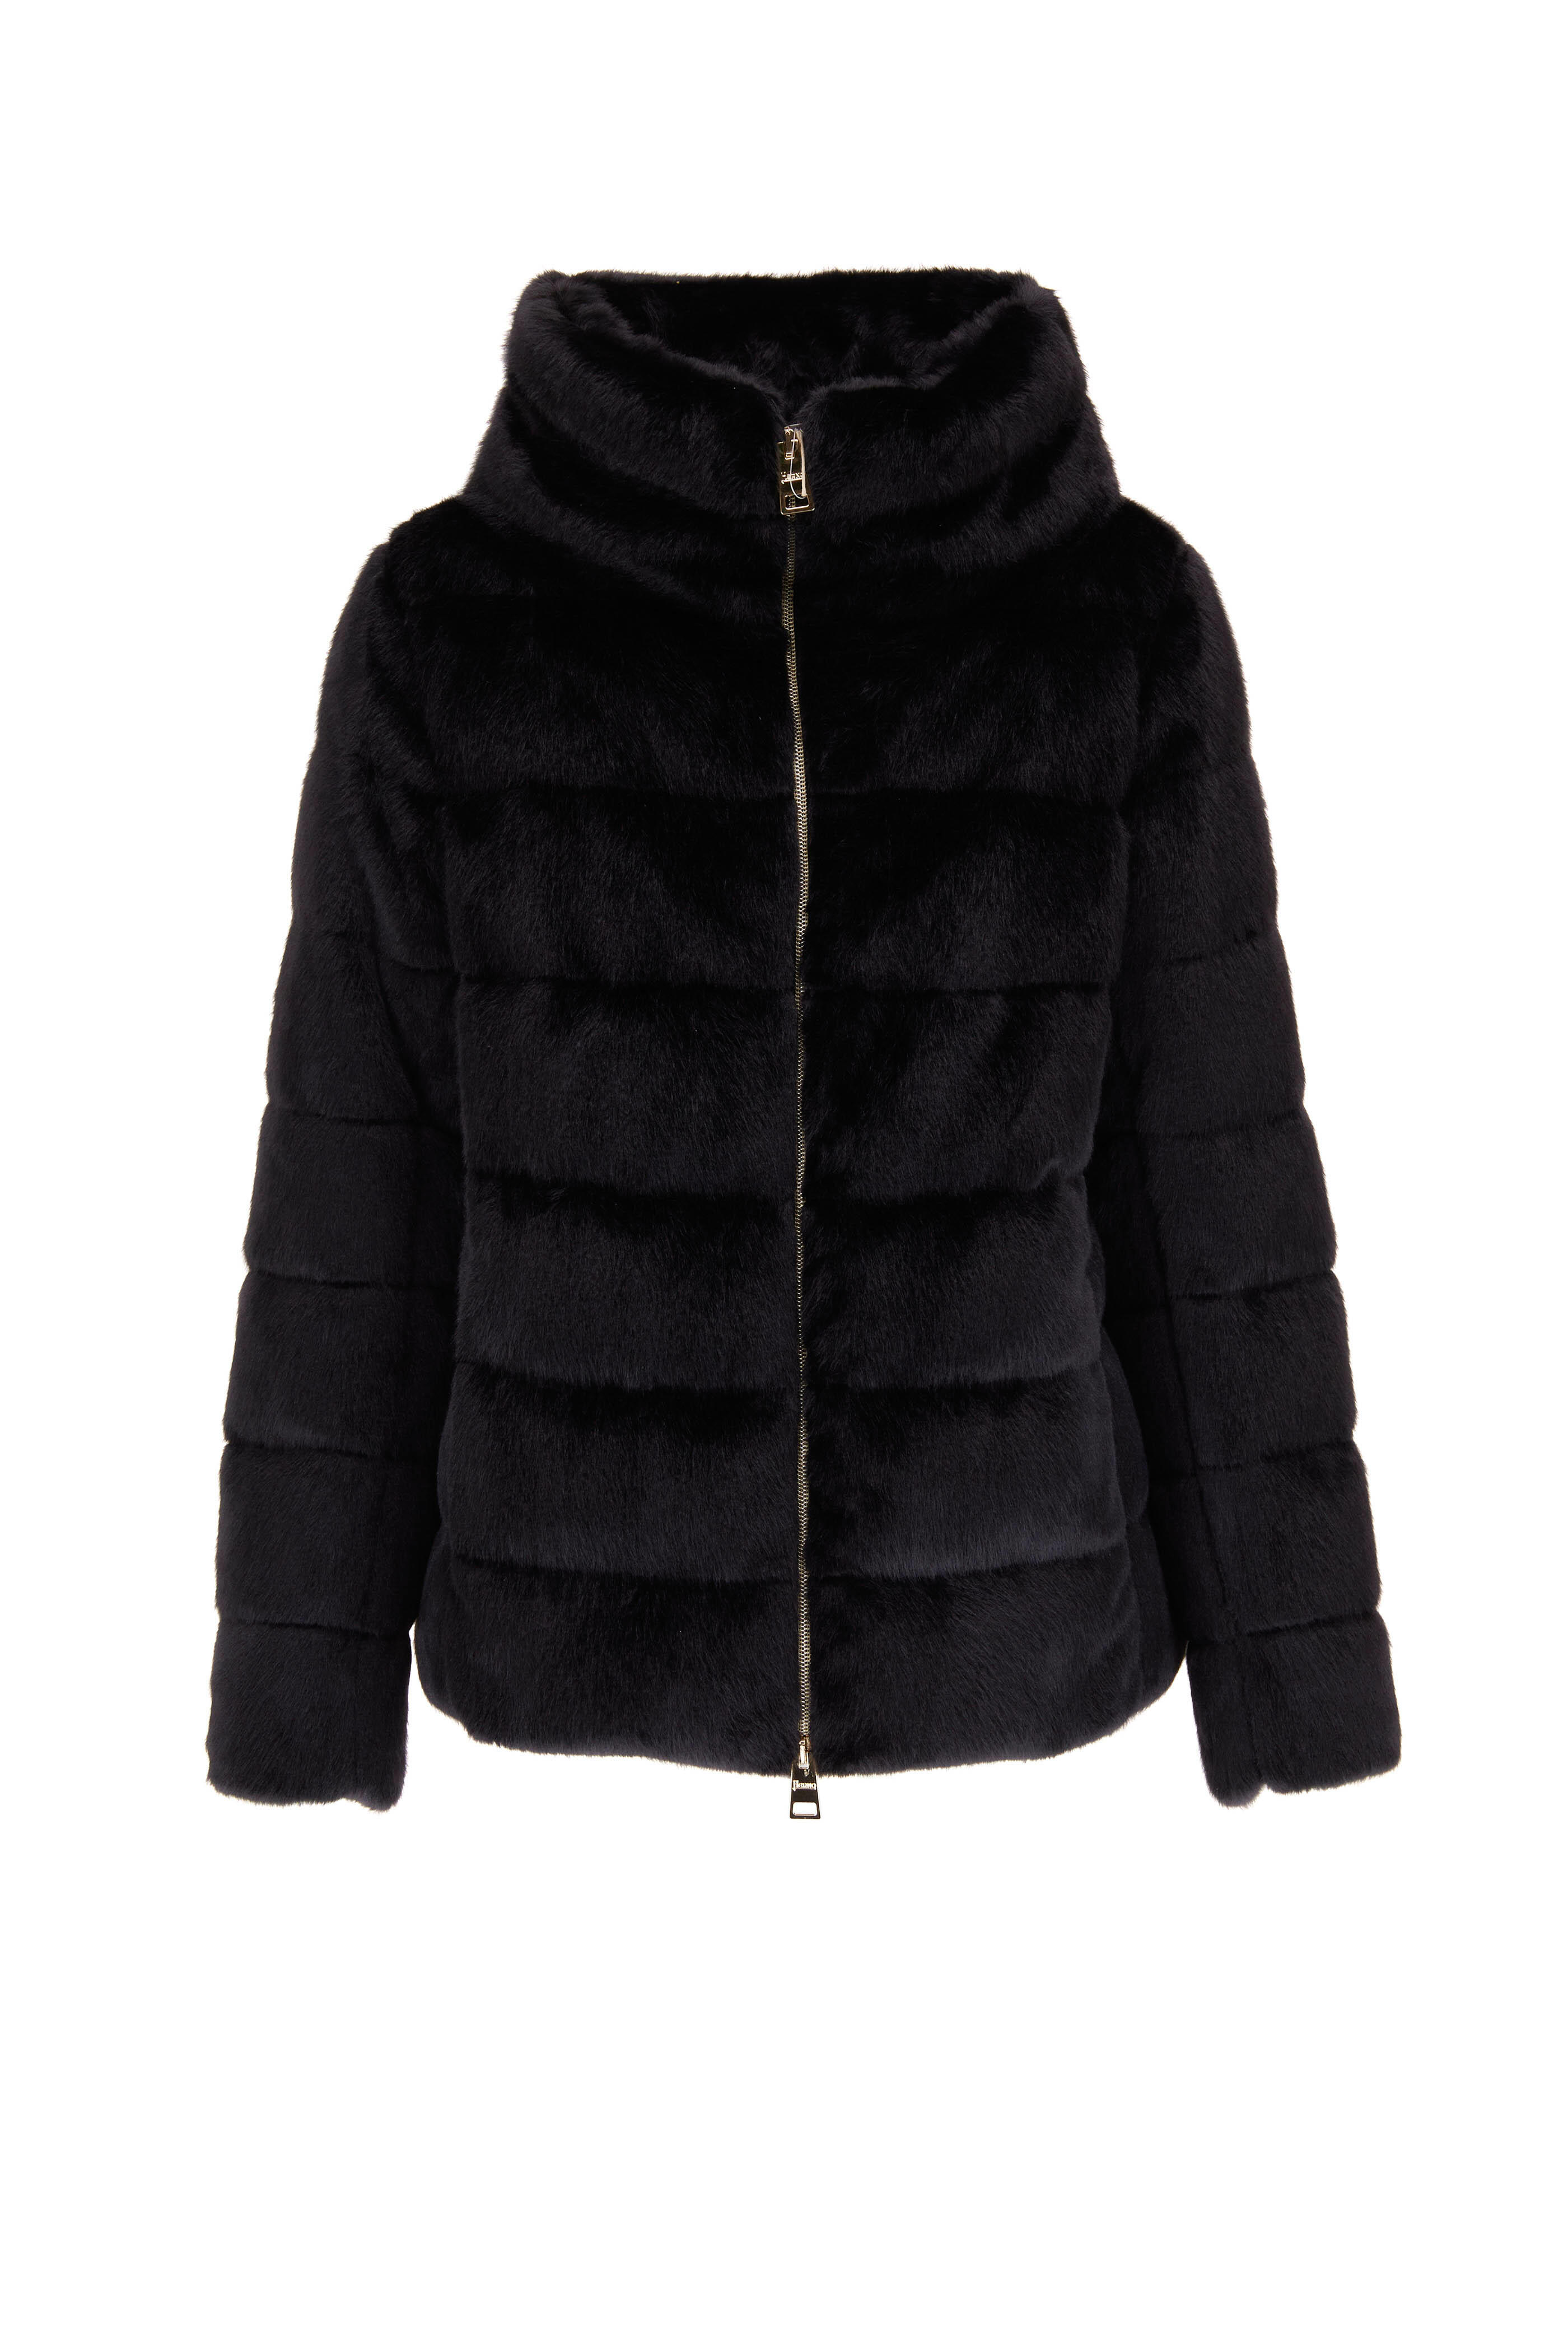 Herno - Black Faux Fur Down Teddy Coat | Mitchell Stores